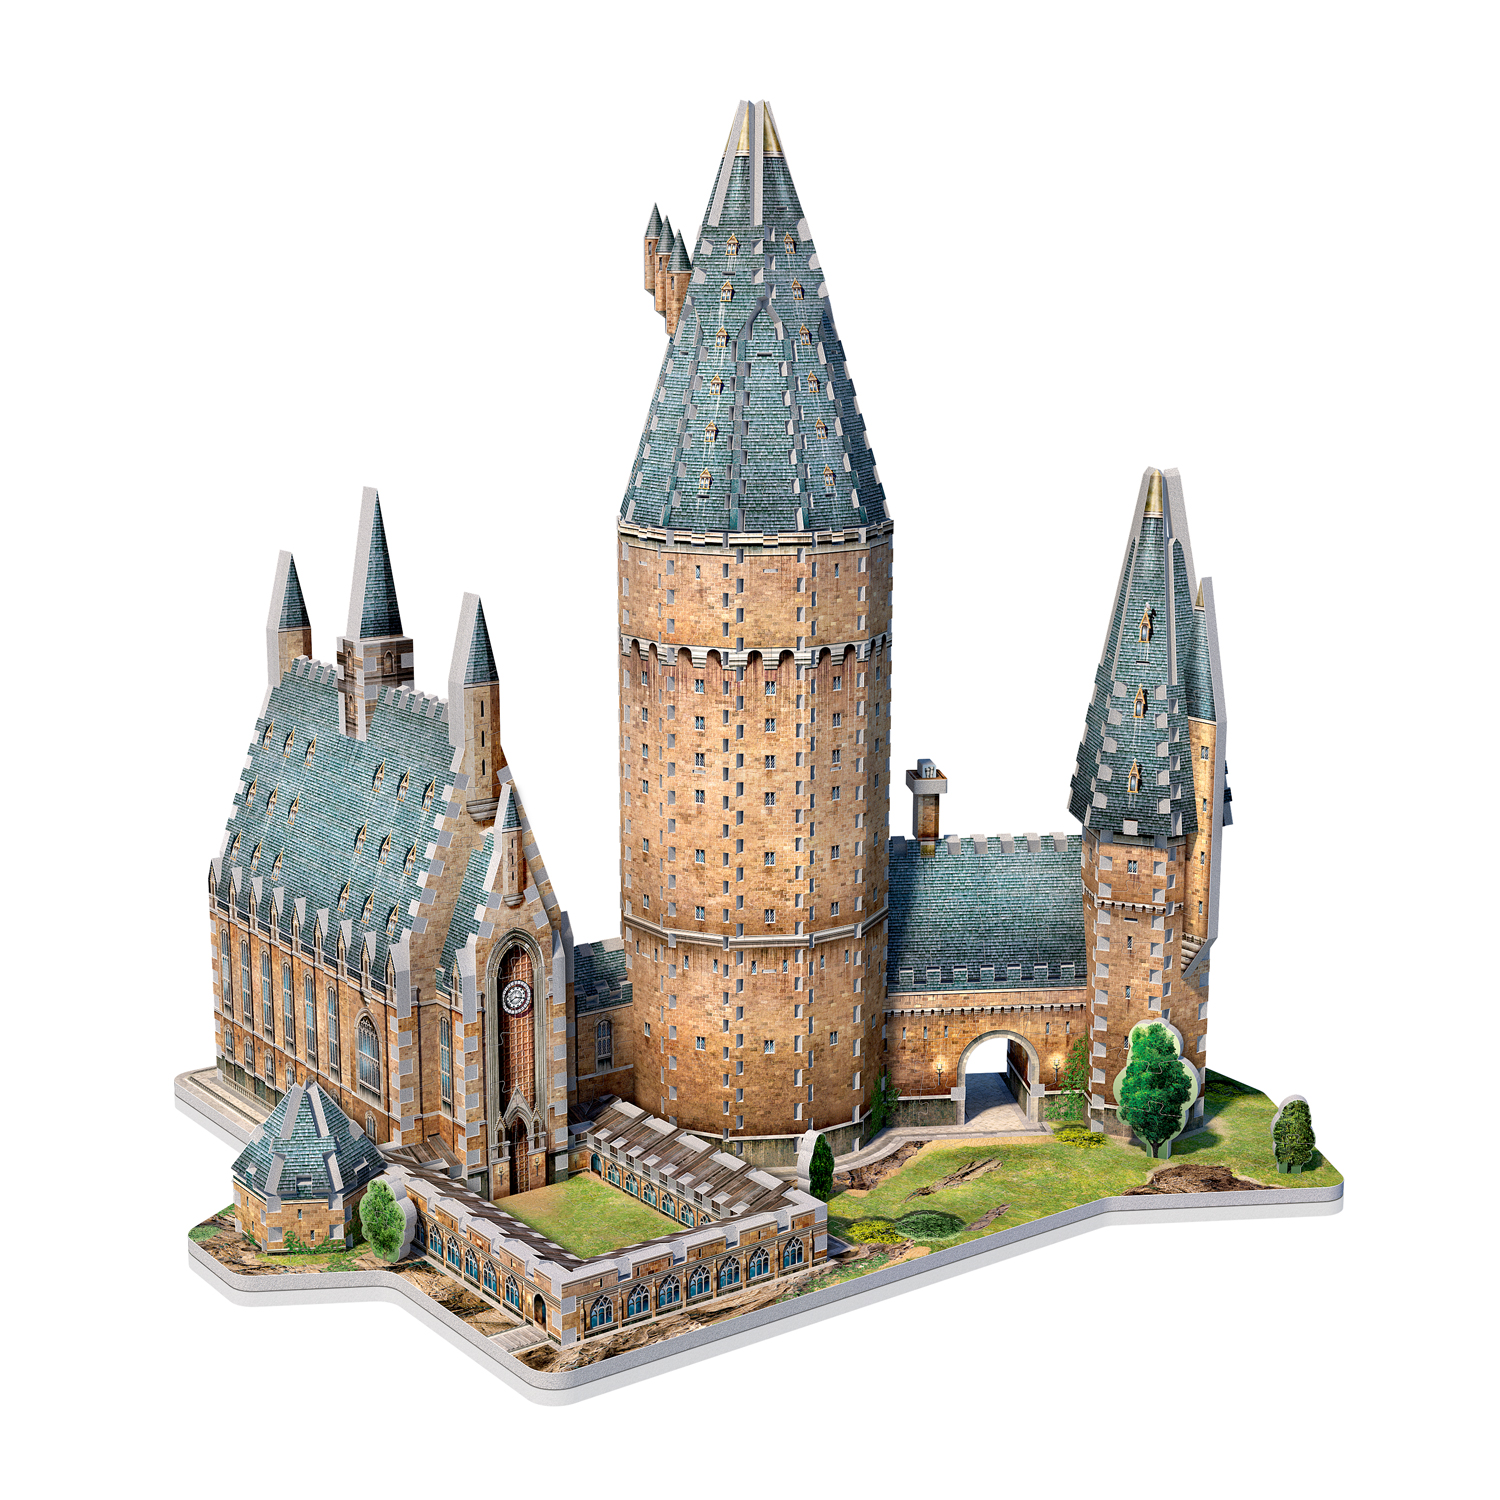 875 Piece 3d Jigsaw Puzzle Harry Potter Hogwarts Astronomy Tower for sale online 